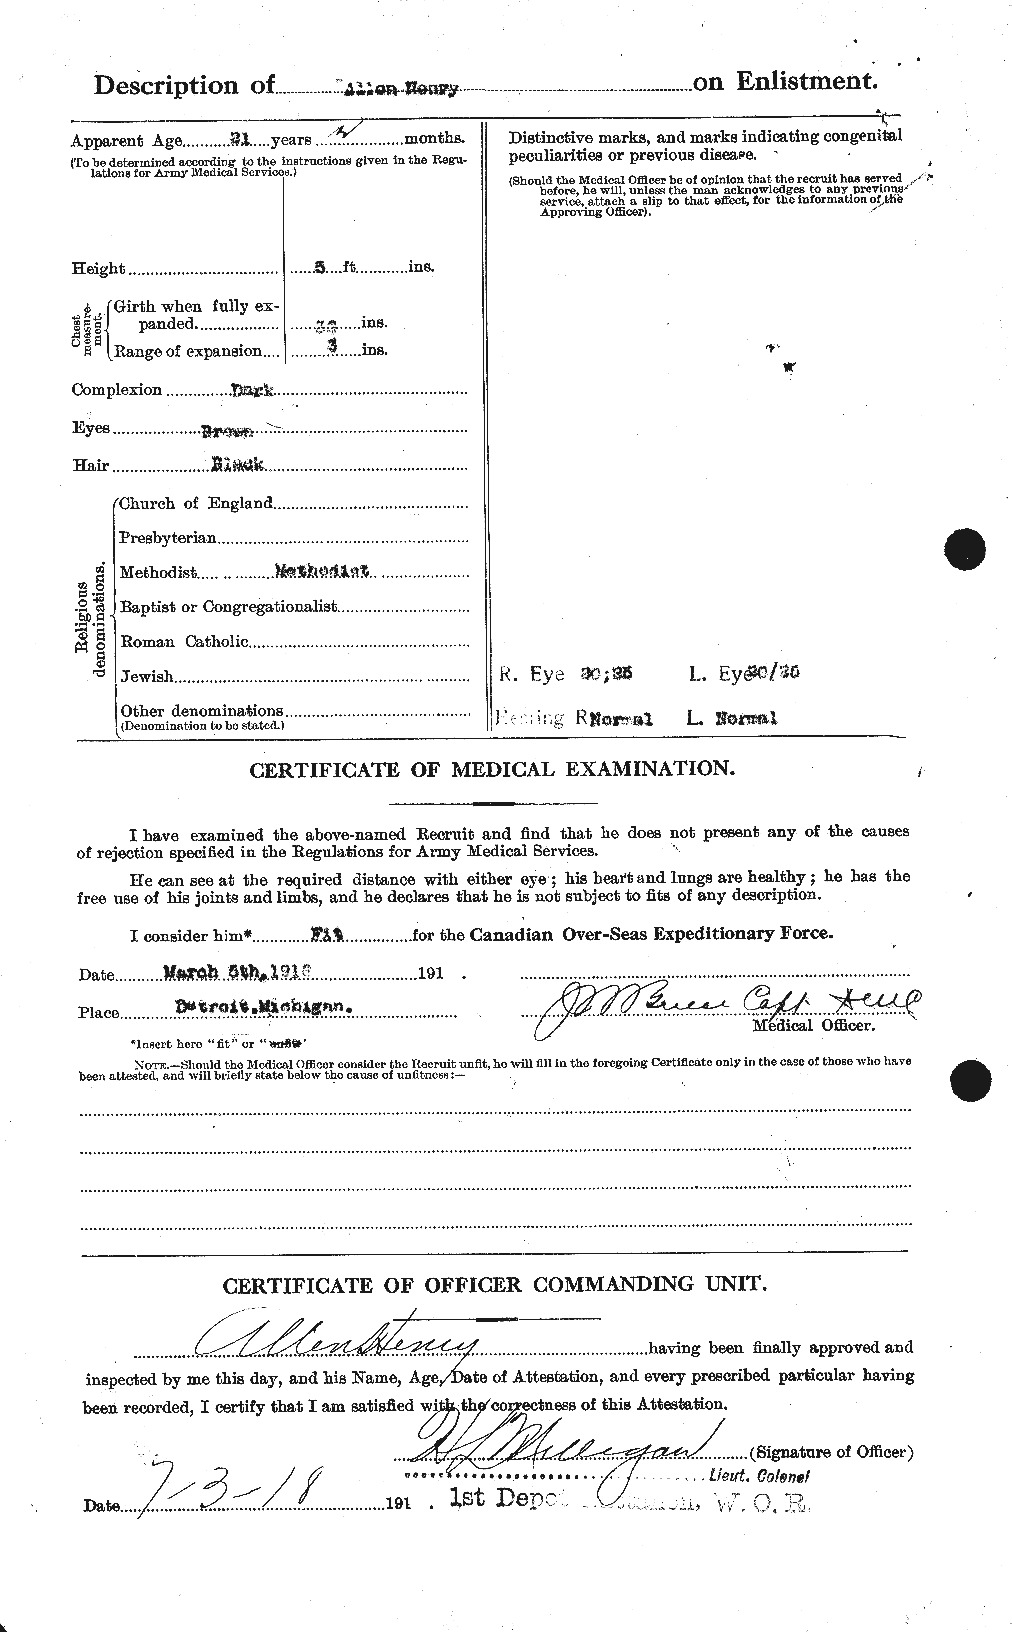 Personnel Records of the First World War - CEF 392772b